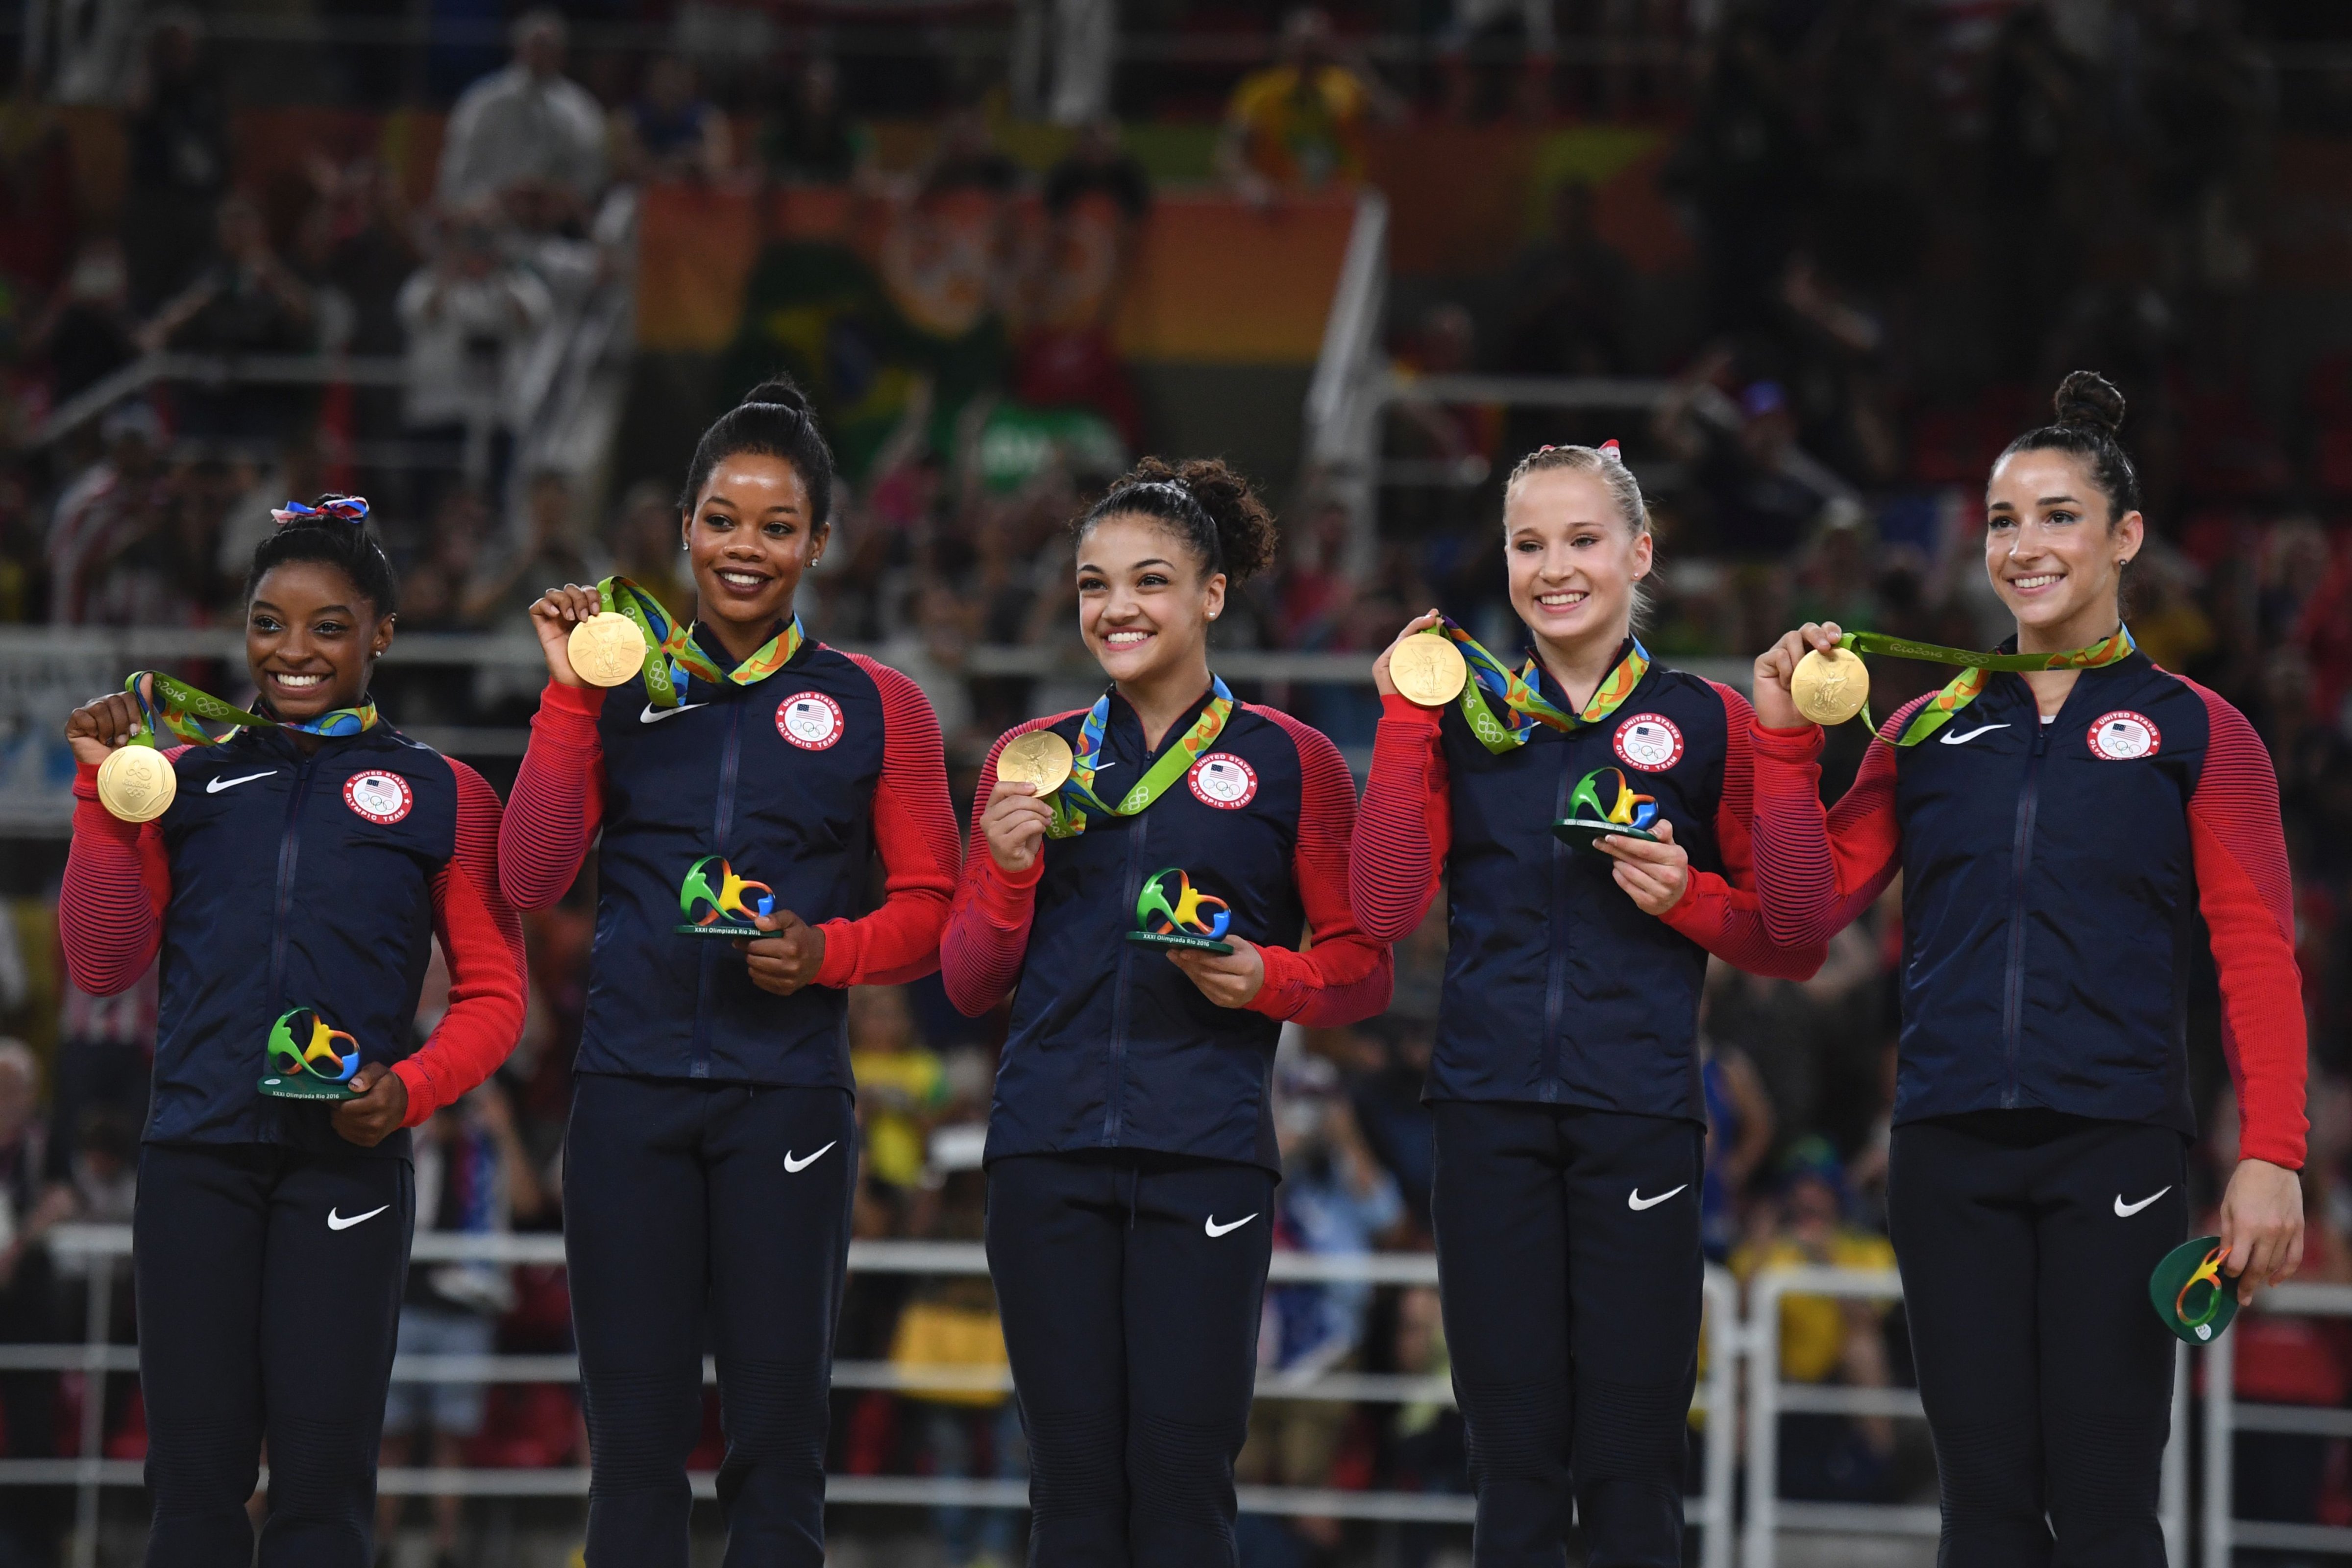 (R-L) US gymnasts Alexandra Raisman, Madison Kocian, Lauren Hernandez, Gabrielle Douglas and Simone Biles celebrate with their gold medals on the podium during the women's team final Artistic Gymnastics at the Olympic Arena during the Rio 2016 Olympic Games in Rio de Janeiro on August 9, 2016. / AFP / Ben STANSALL        (Photo credit should read BEN STANSALL/AFP/Getty Images) (Ben Stansall&mdash;Getty Images)